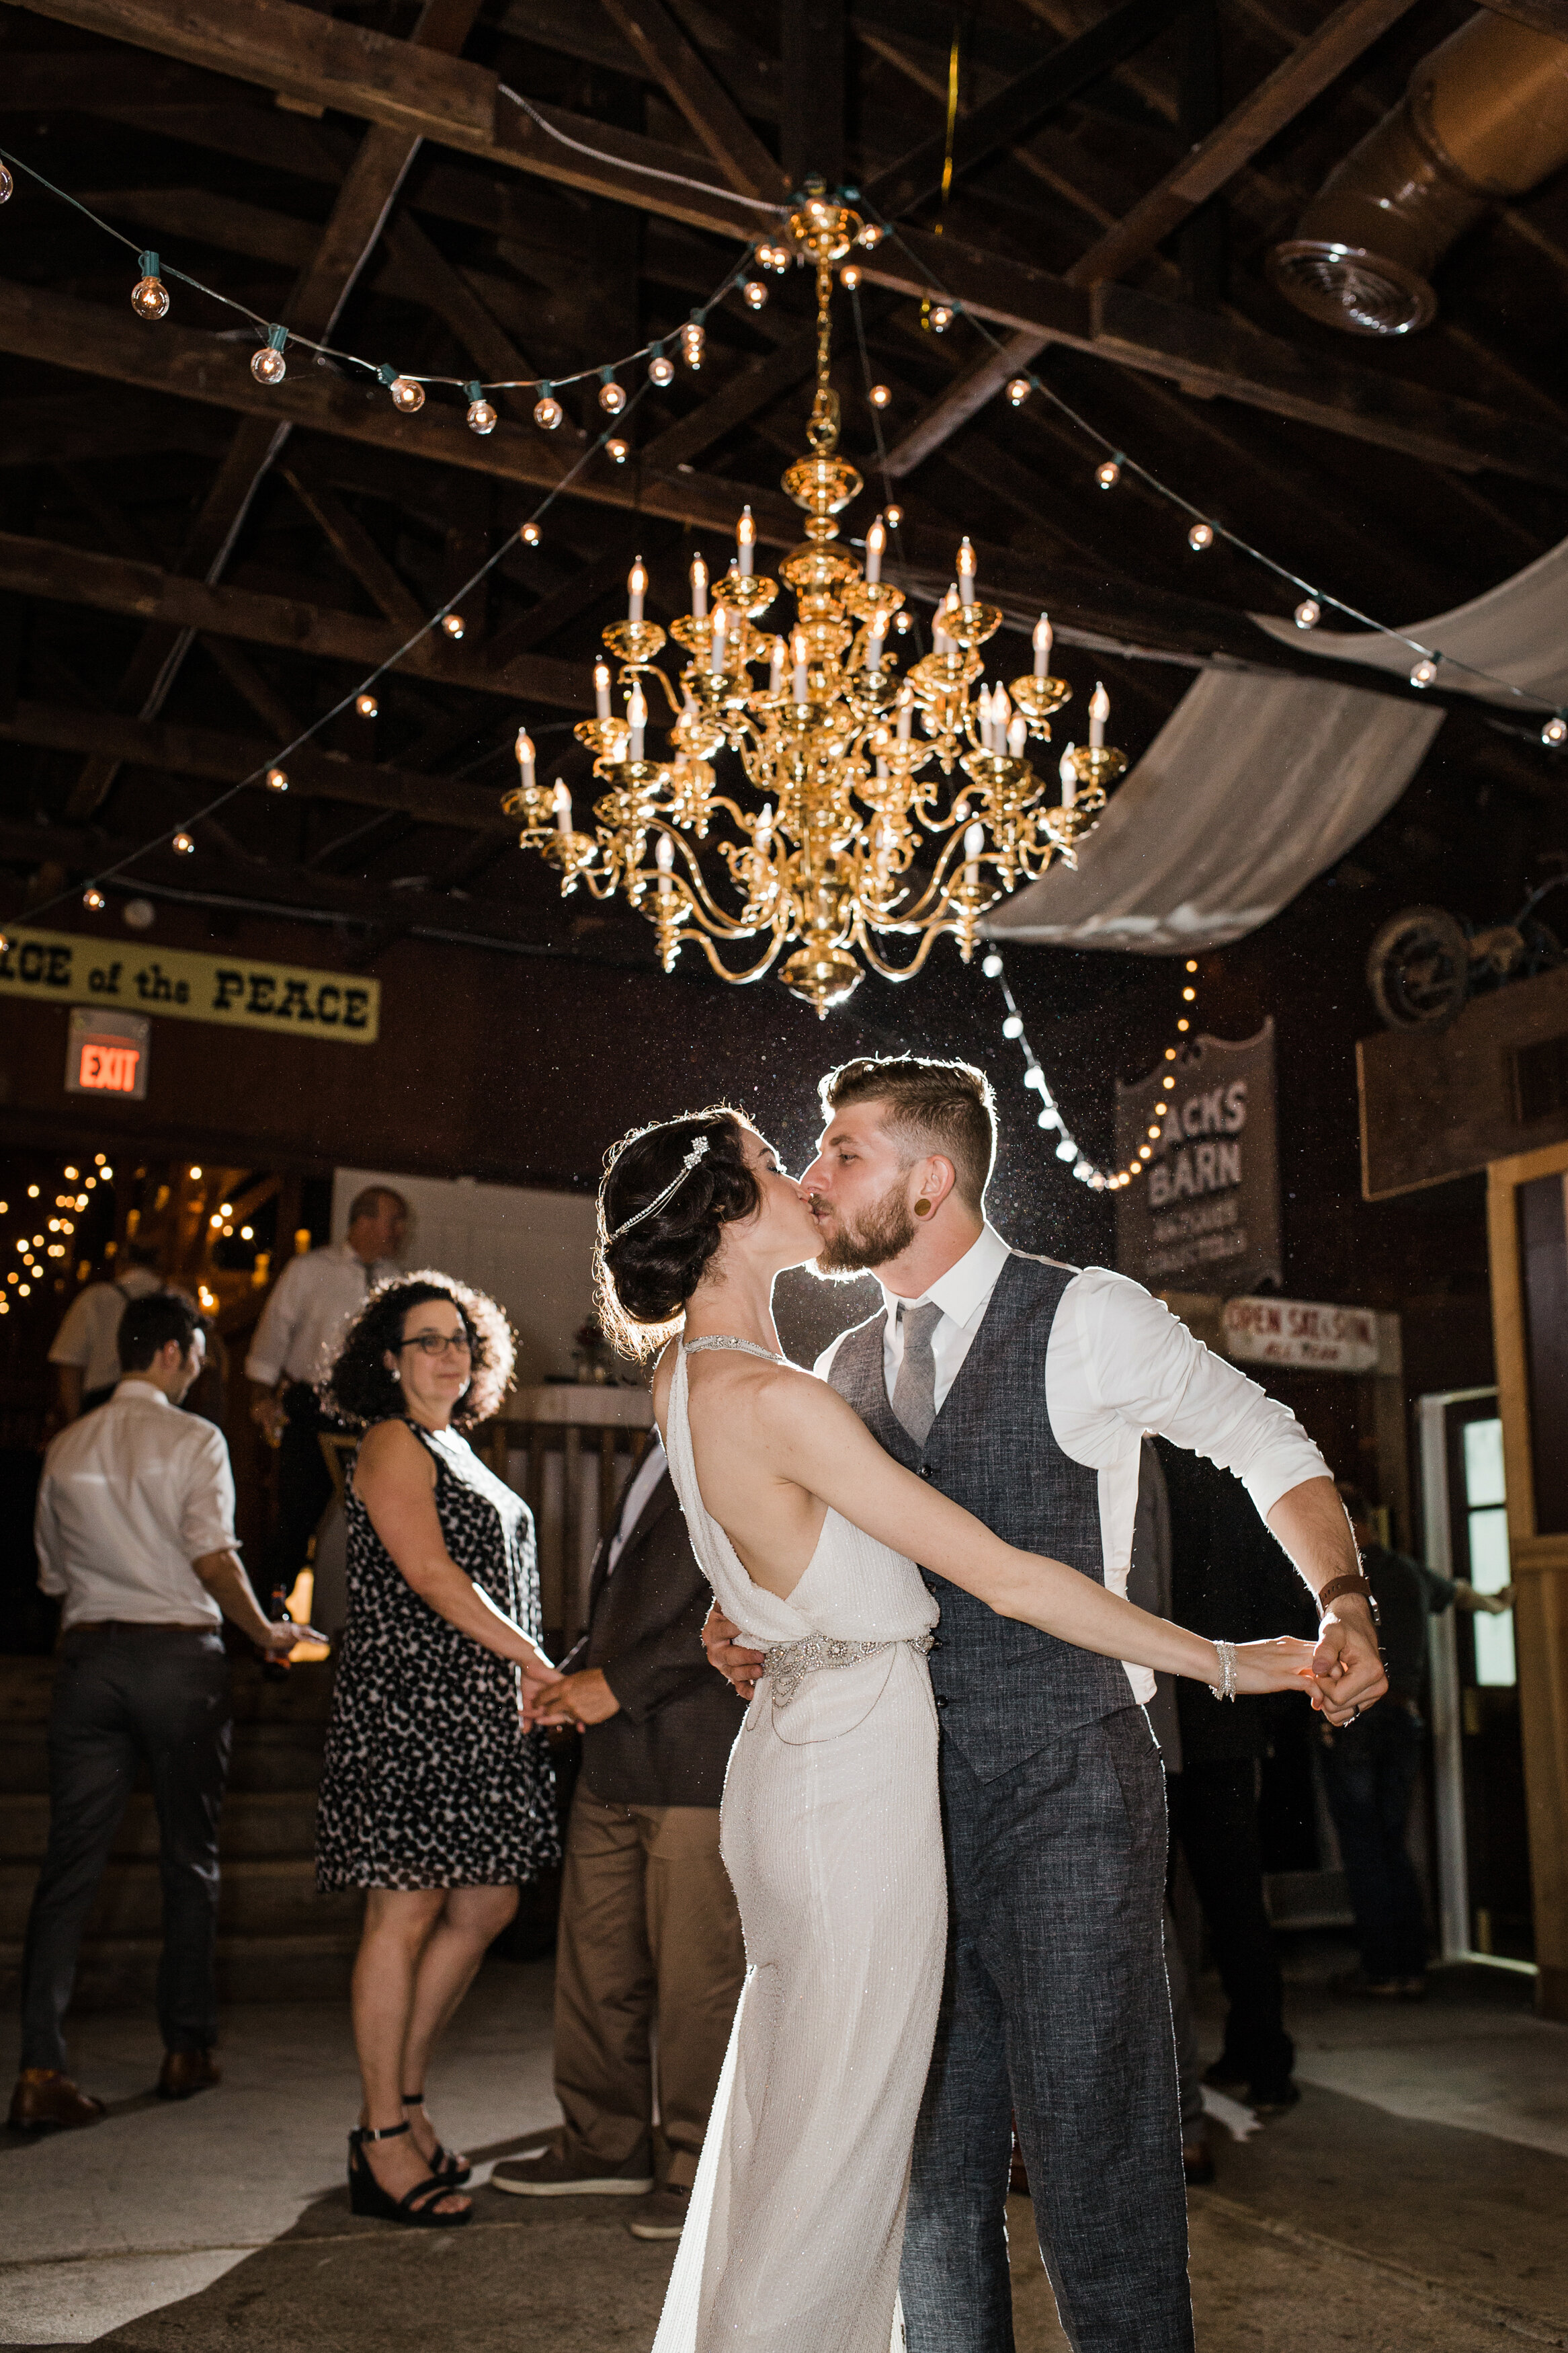 bride and groom have first dance for wedding photographer at Jacks Barn in Oxford, New Jersey.